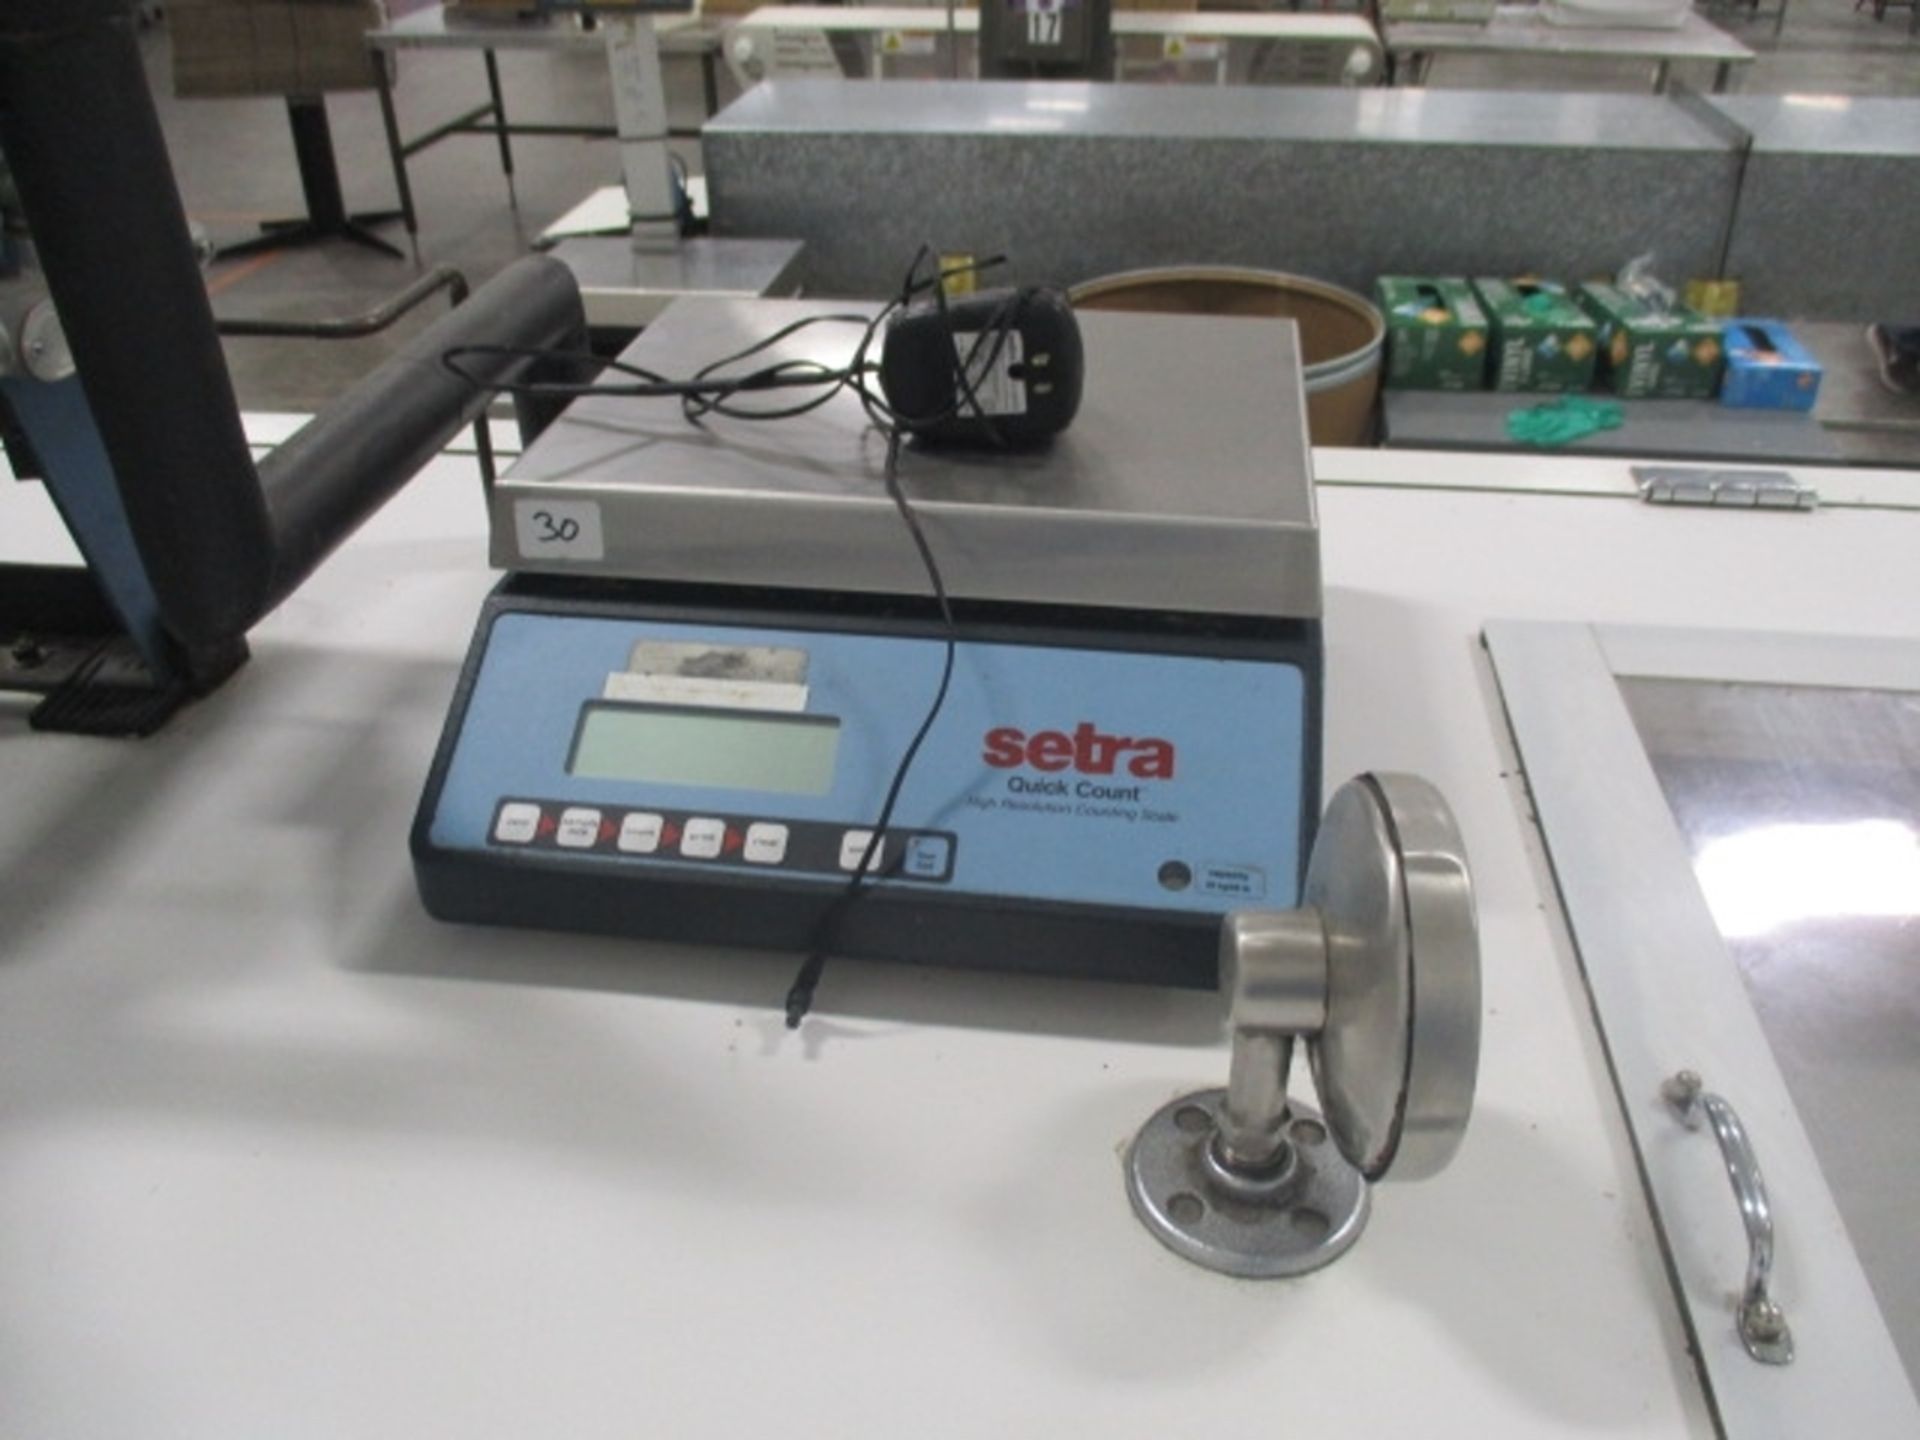 Setra Model Quick Count 55-Lb. Digital Platform Scale | Rig Fee: No Charge - Image 2 of 3